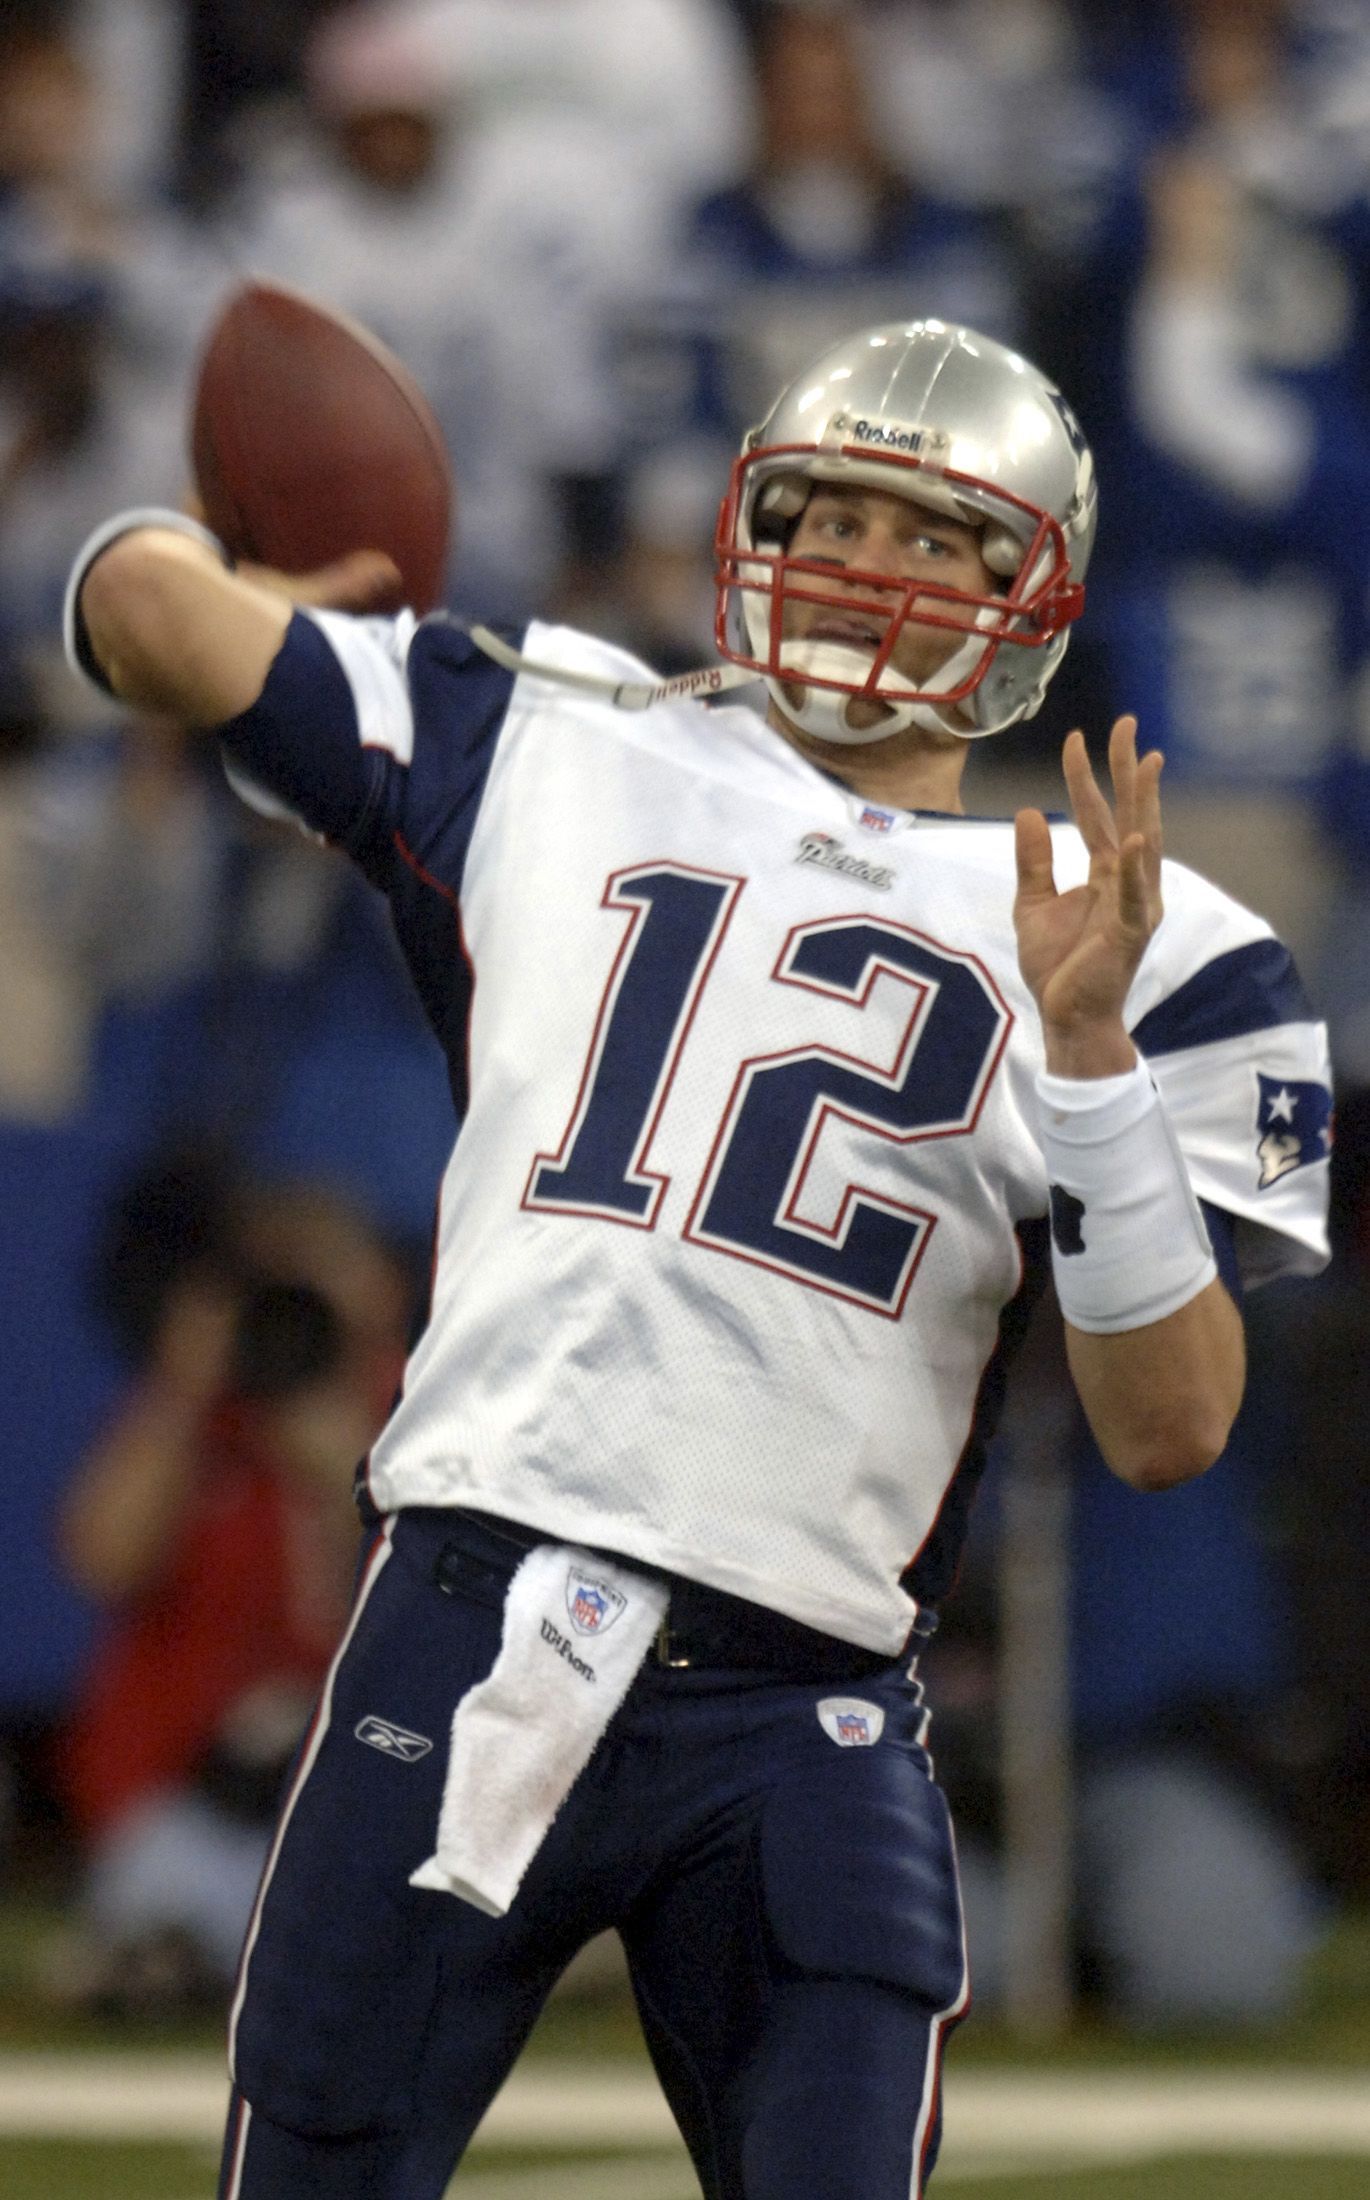 Tom Brady, quarterback for the New England Patriots, passes the ball in the third quarter of the AFC Championship game agianst the Indianapolis Colts, at the RCA Dome in Indianapolis, on Sunday, Jan. 21, 2007. Photographer: Tom Strickland/Bloomberg News